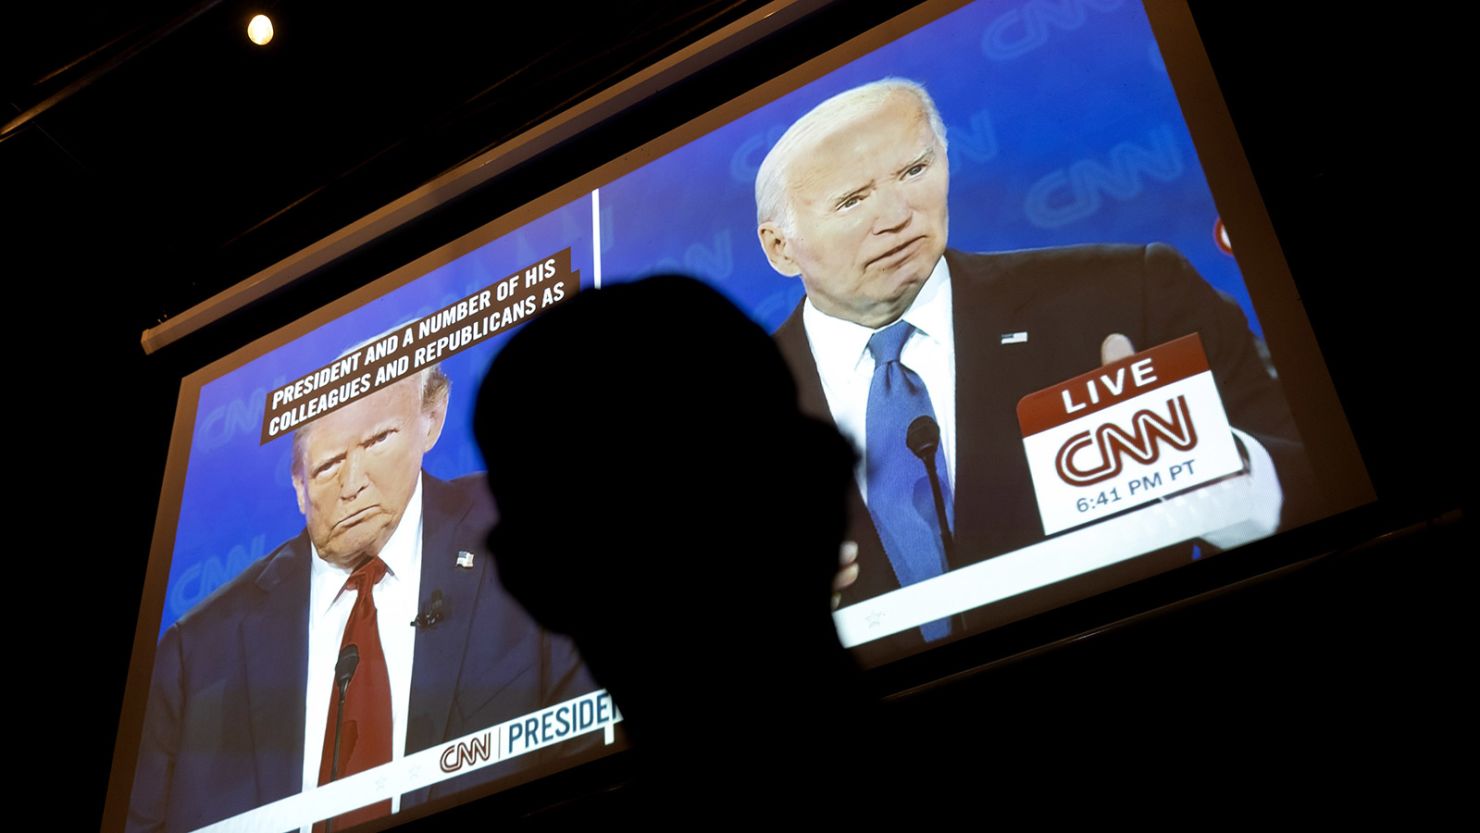 A man watches the CNN presidential debate between Donald Trump and Joe Biden at a watch party at Union Pub in Washington, DC, on June 27, 2024.